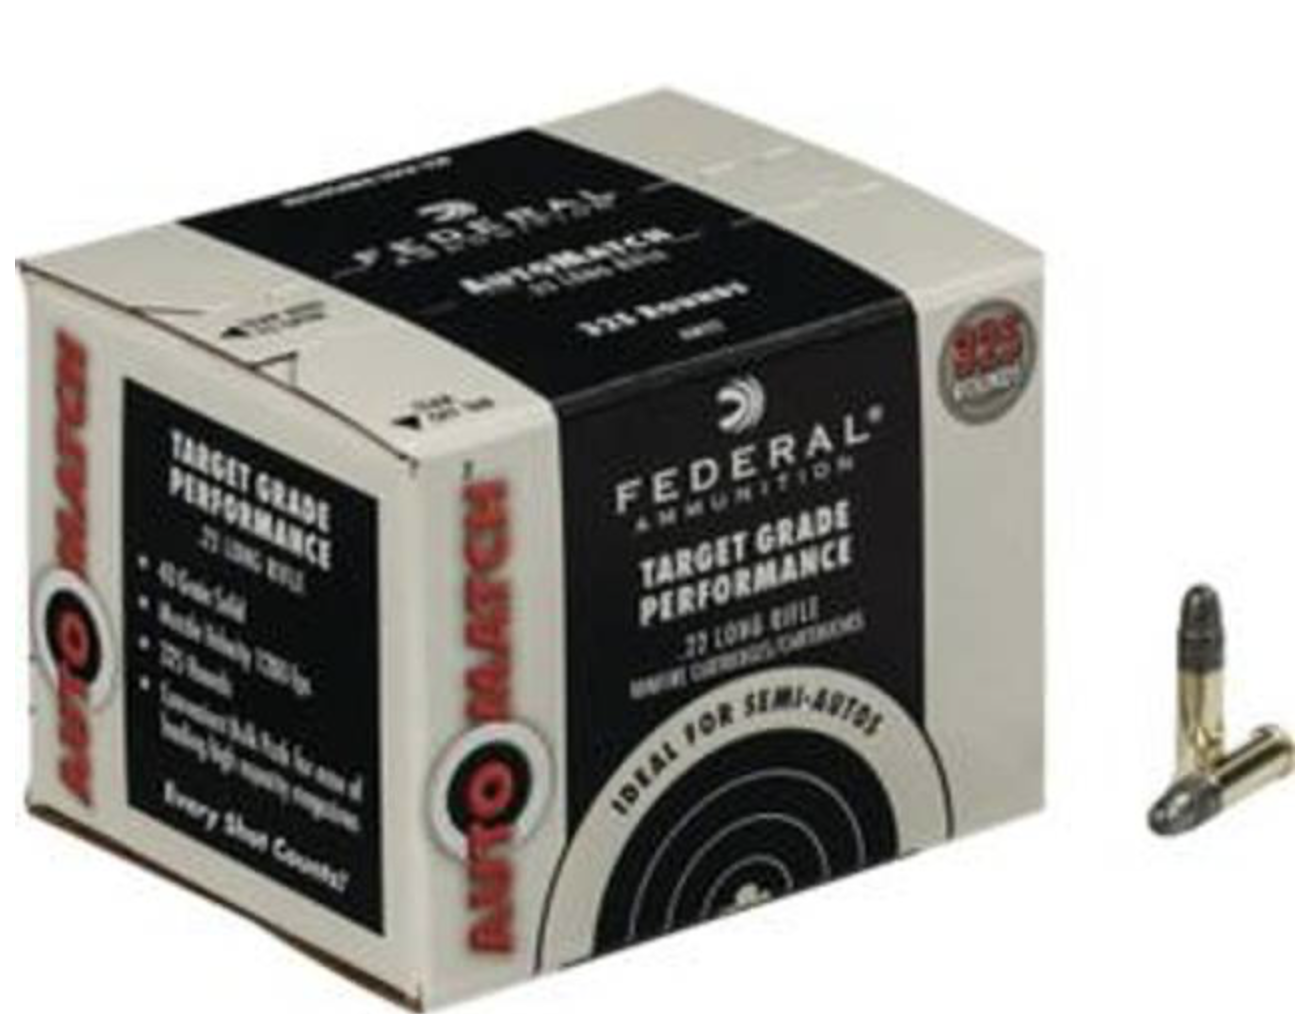 Federal - Automatch Target 22LR - 40g - 325-pack